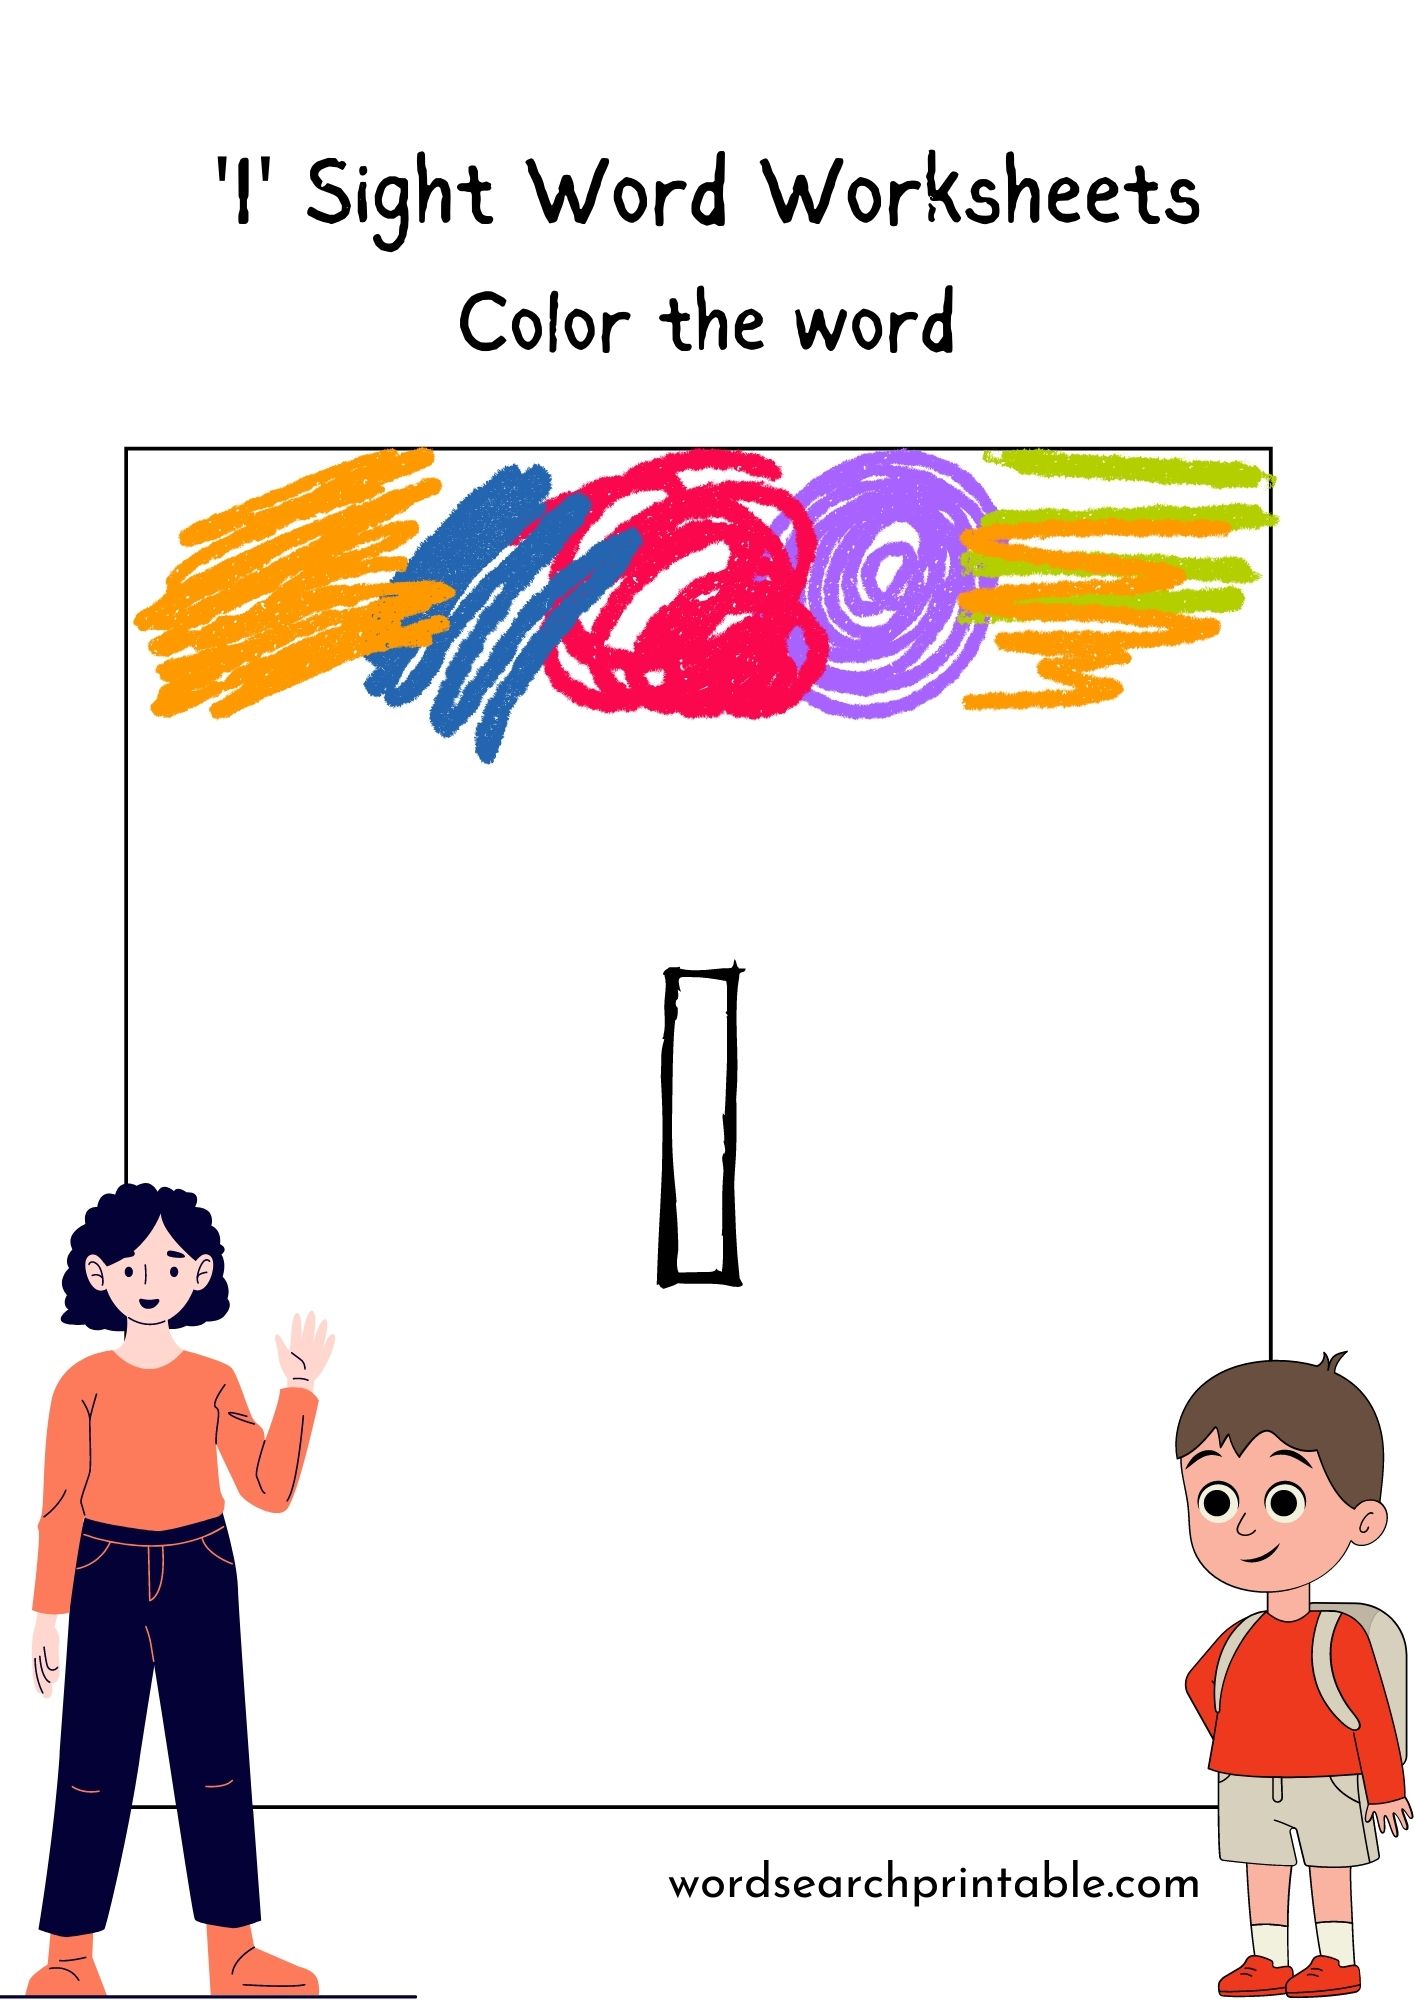 Color the sight word “I”